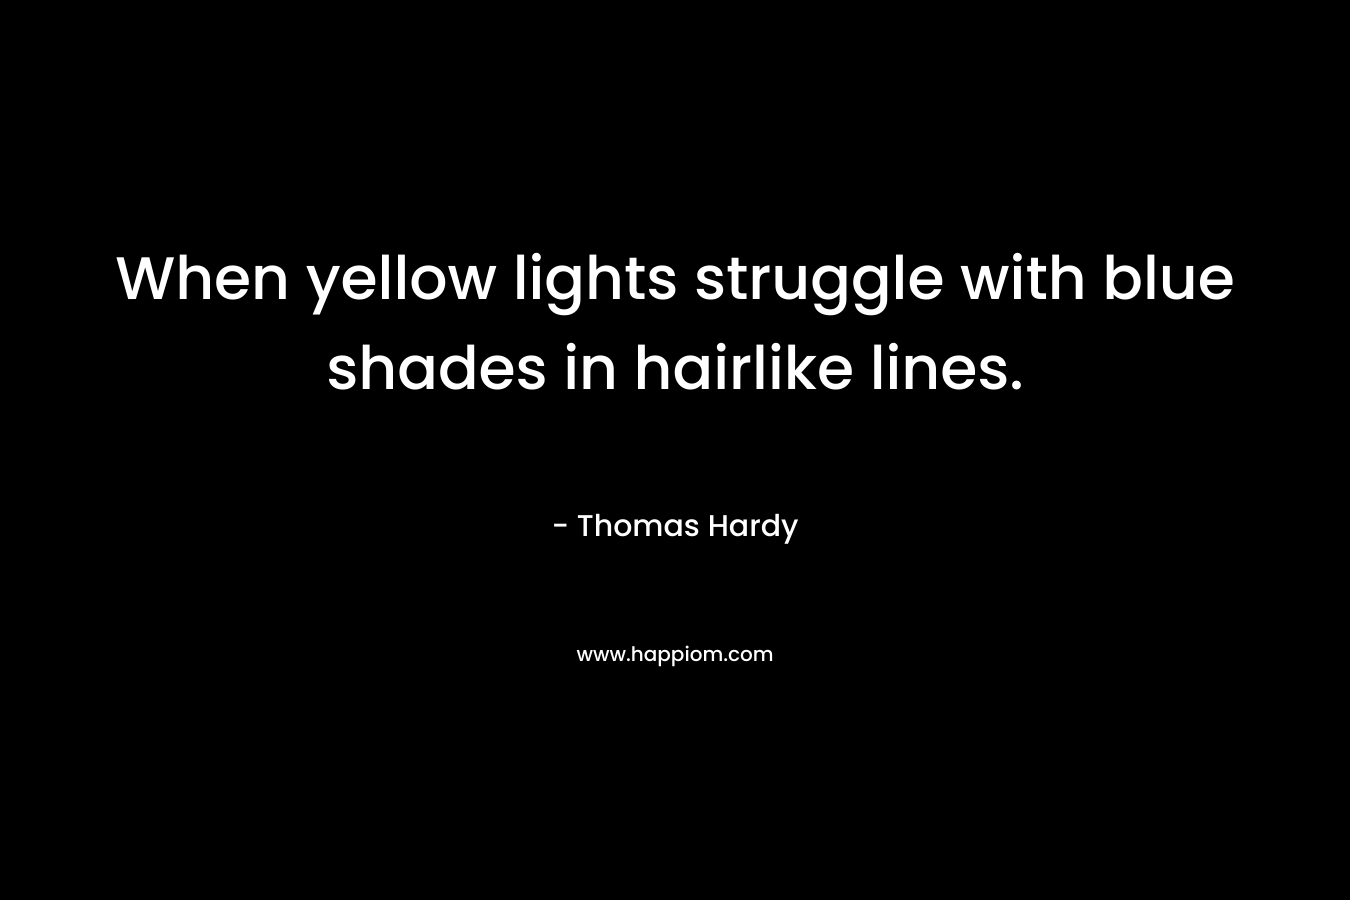 When yellow lights struggle with blue shades in hairlike lines.